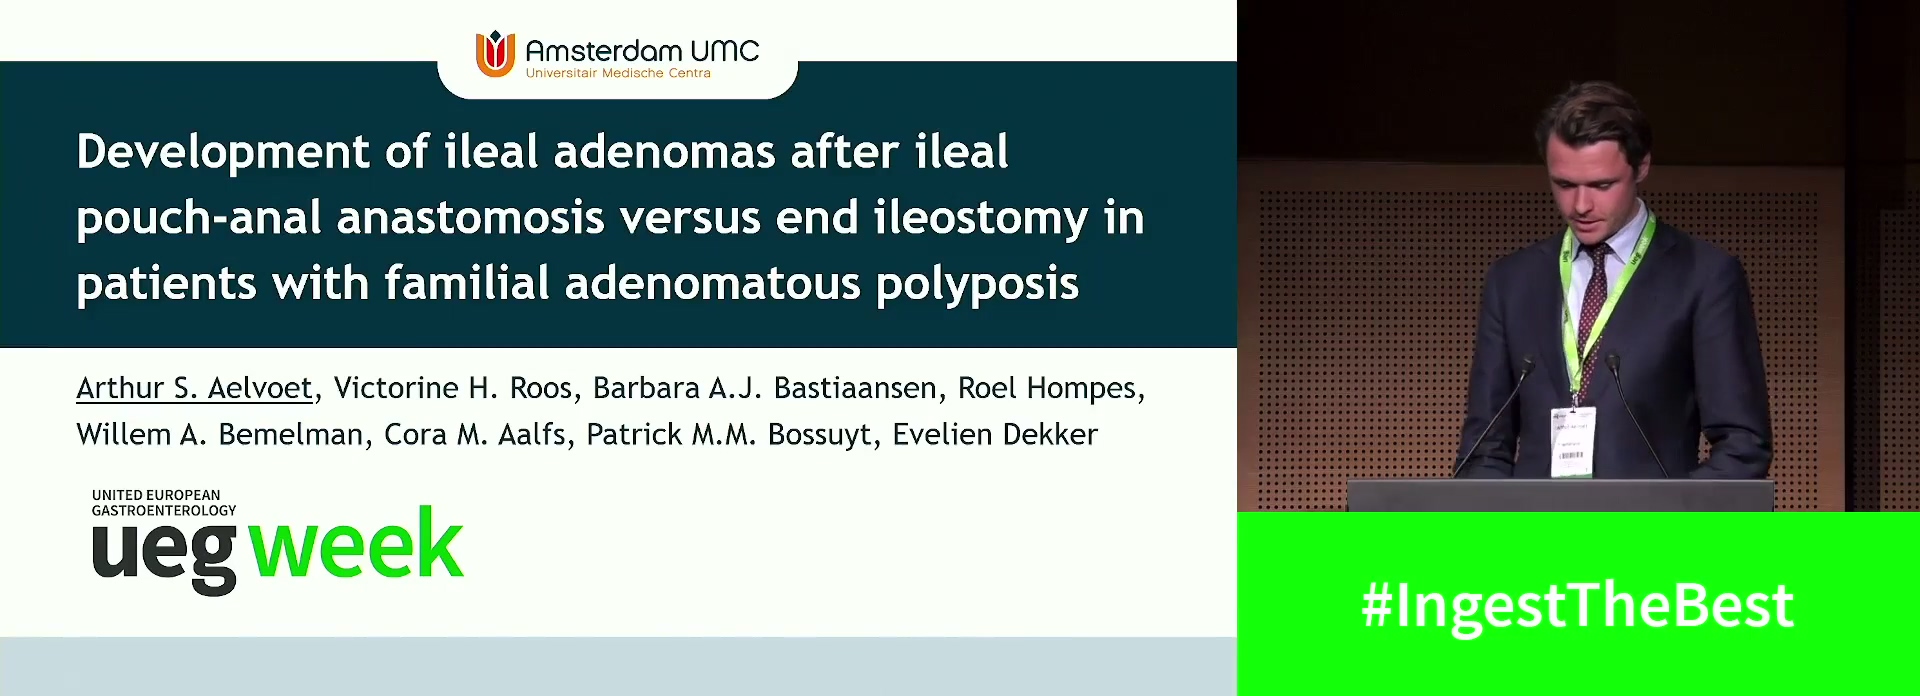 DEVELOPMENT OF ILEAL ADENOMAS AFTER ILEAL POUCH-ANAL ANASTOMOSIS VERSUS END ILEOSTOMY IN PATIENTS WITH FAMILIAL ADENOMATOUS POLYPOSIS